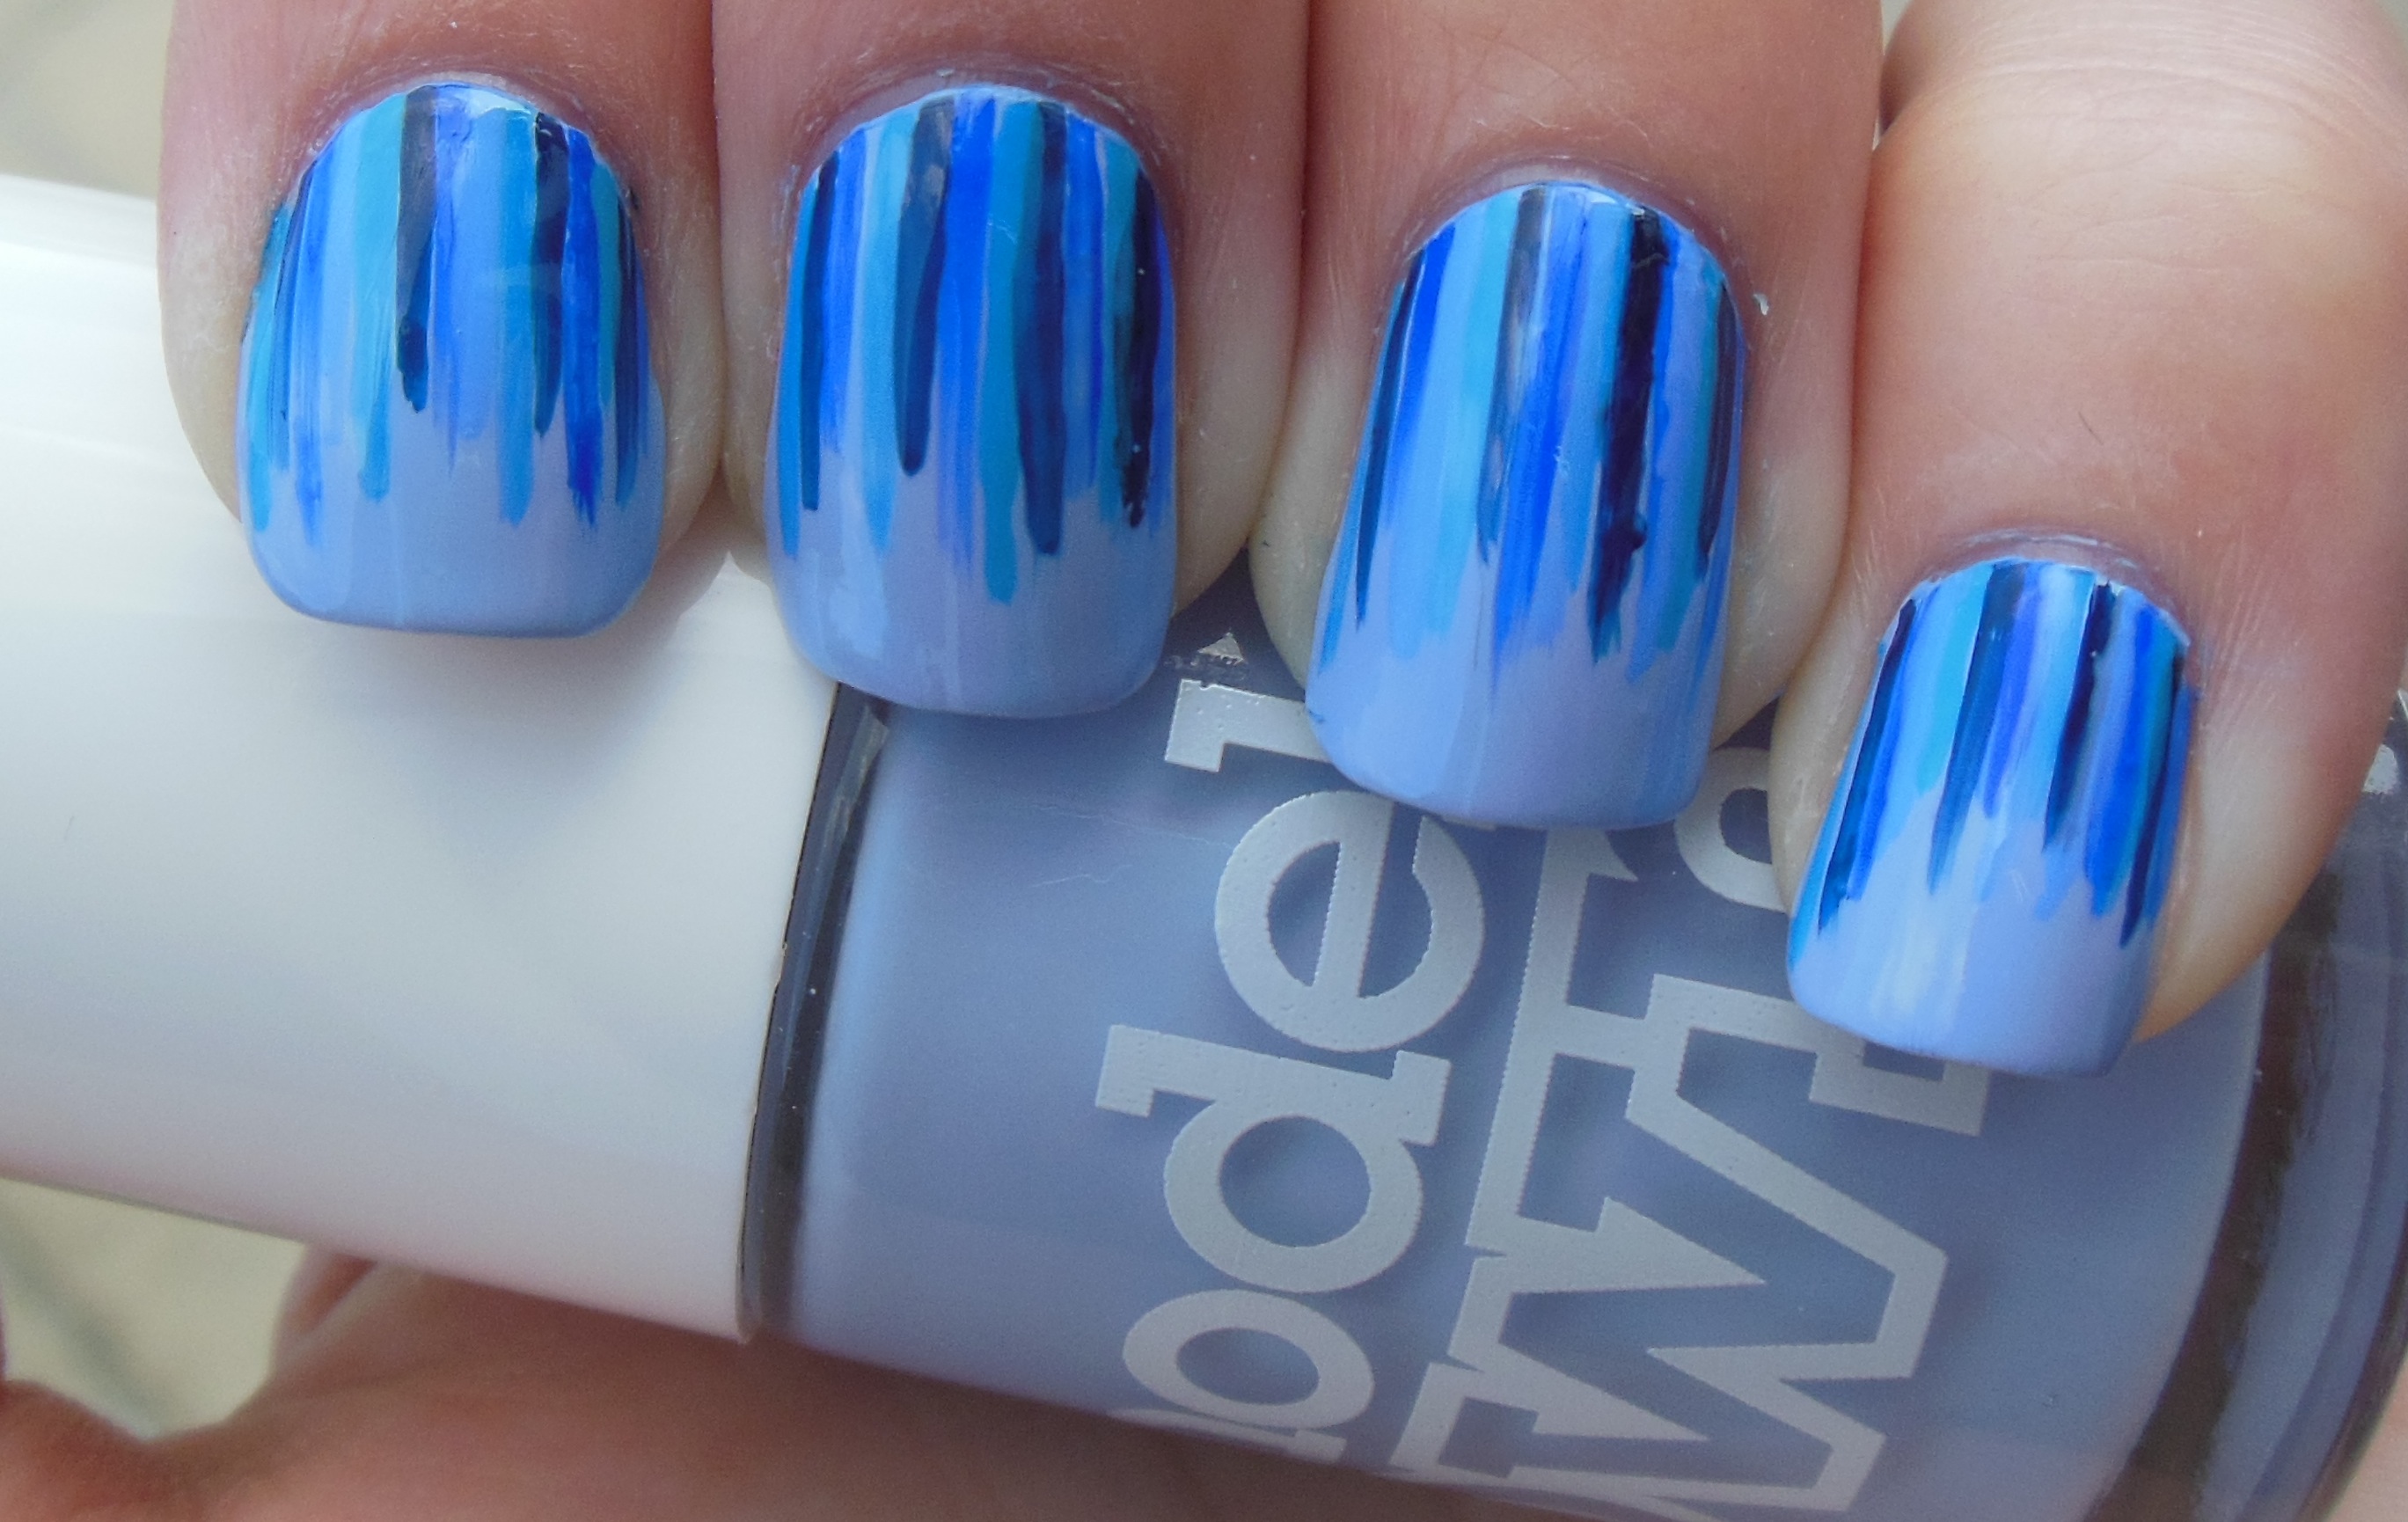 Simple Blue Design Ready in Five Minutes